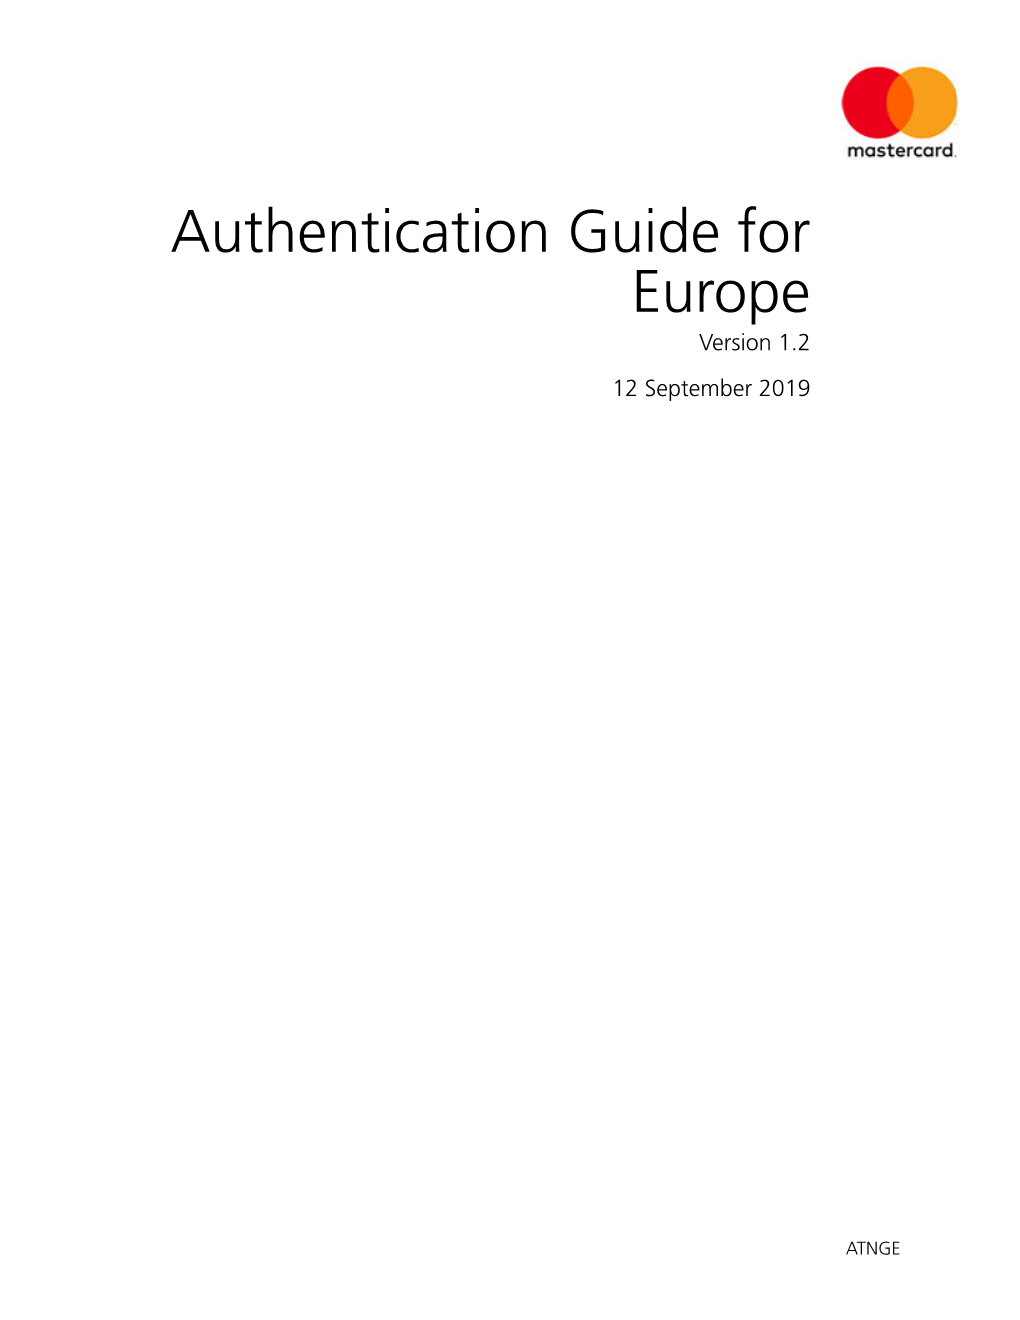 Authentication Guide for Europe Version 1.2 12 September 2019